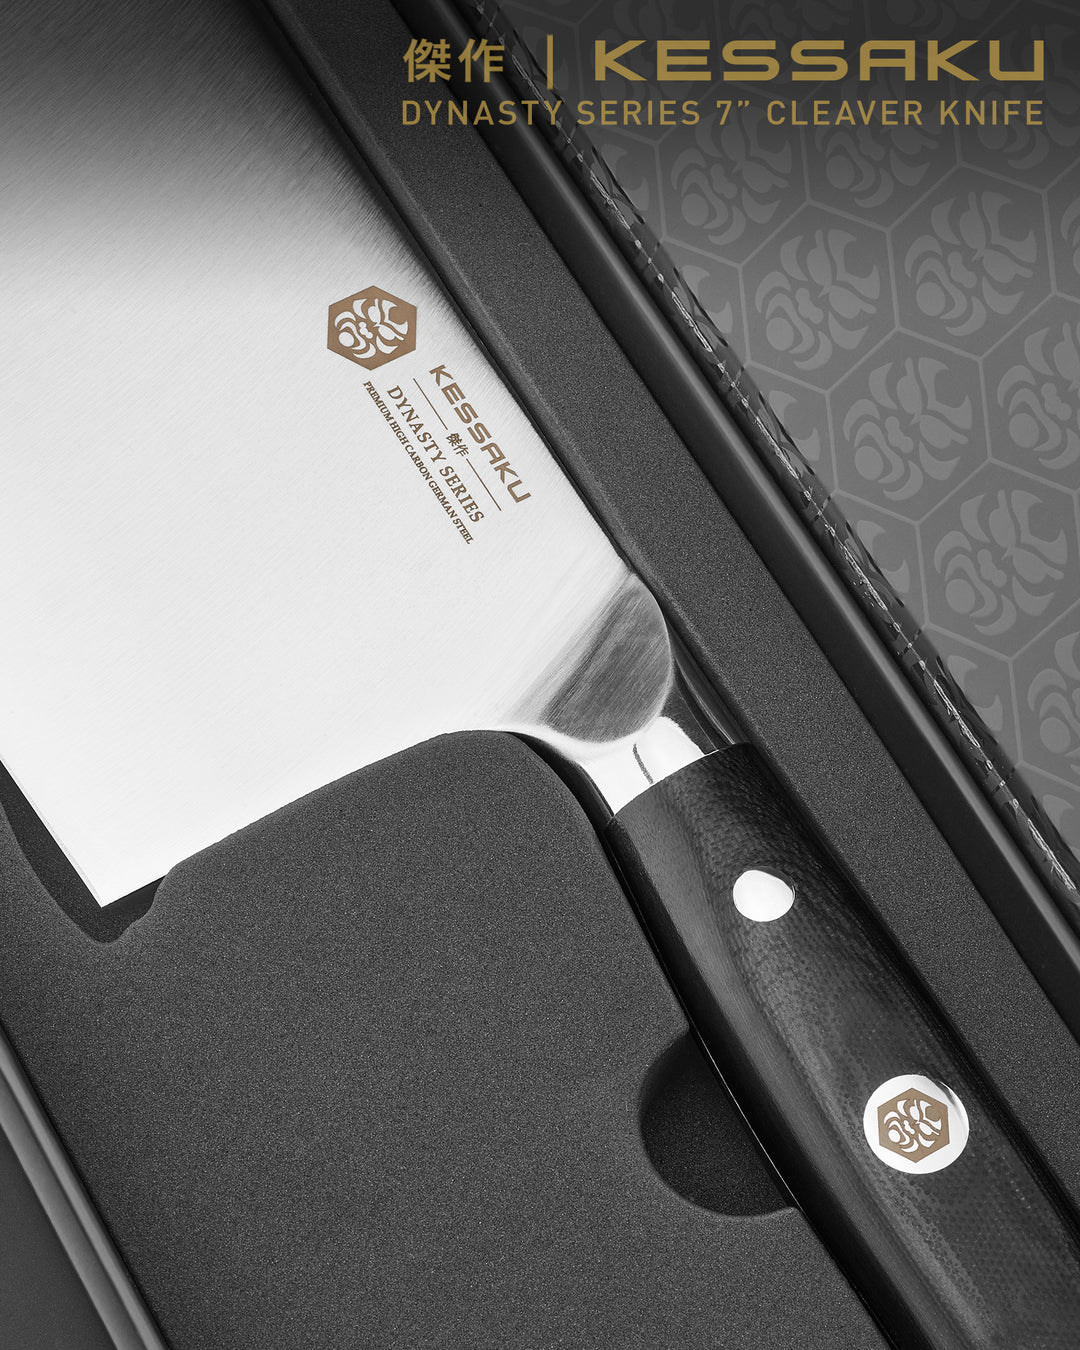 The Dynasty Cleaver in its premium gift box